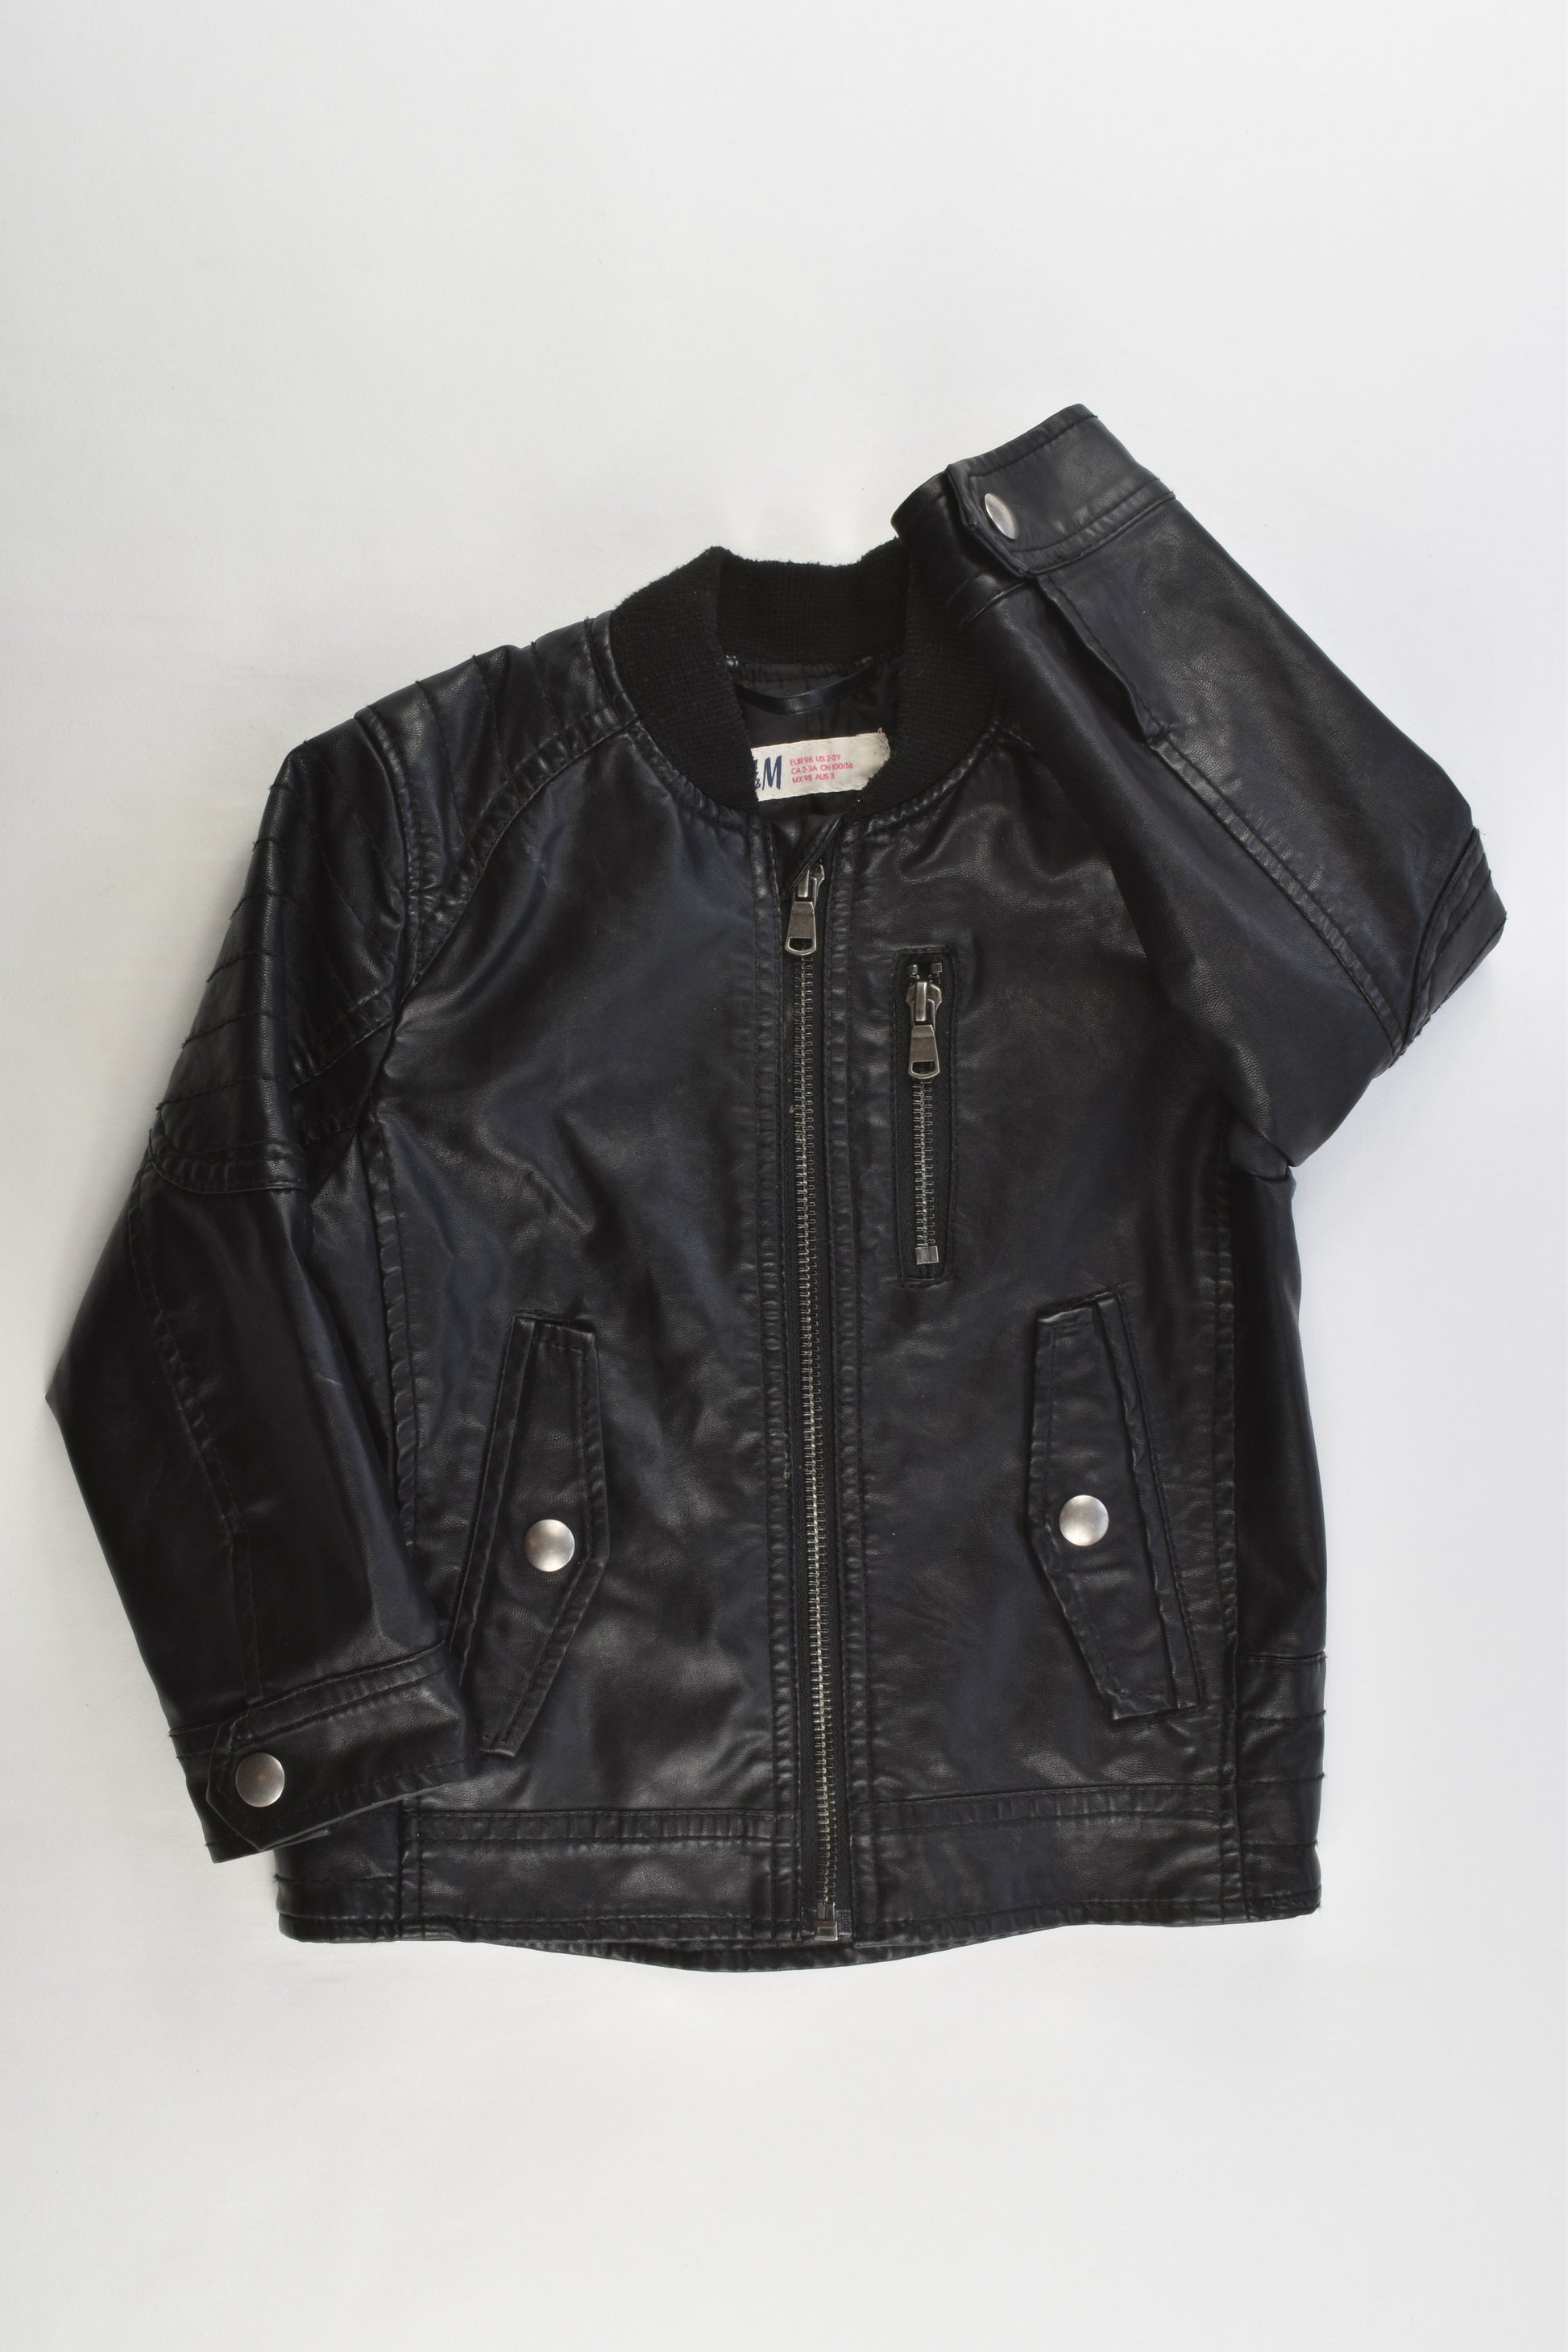 H&M Size 3 (98 cm) Leather-like Lined Jacket